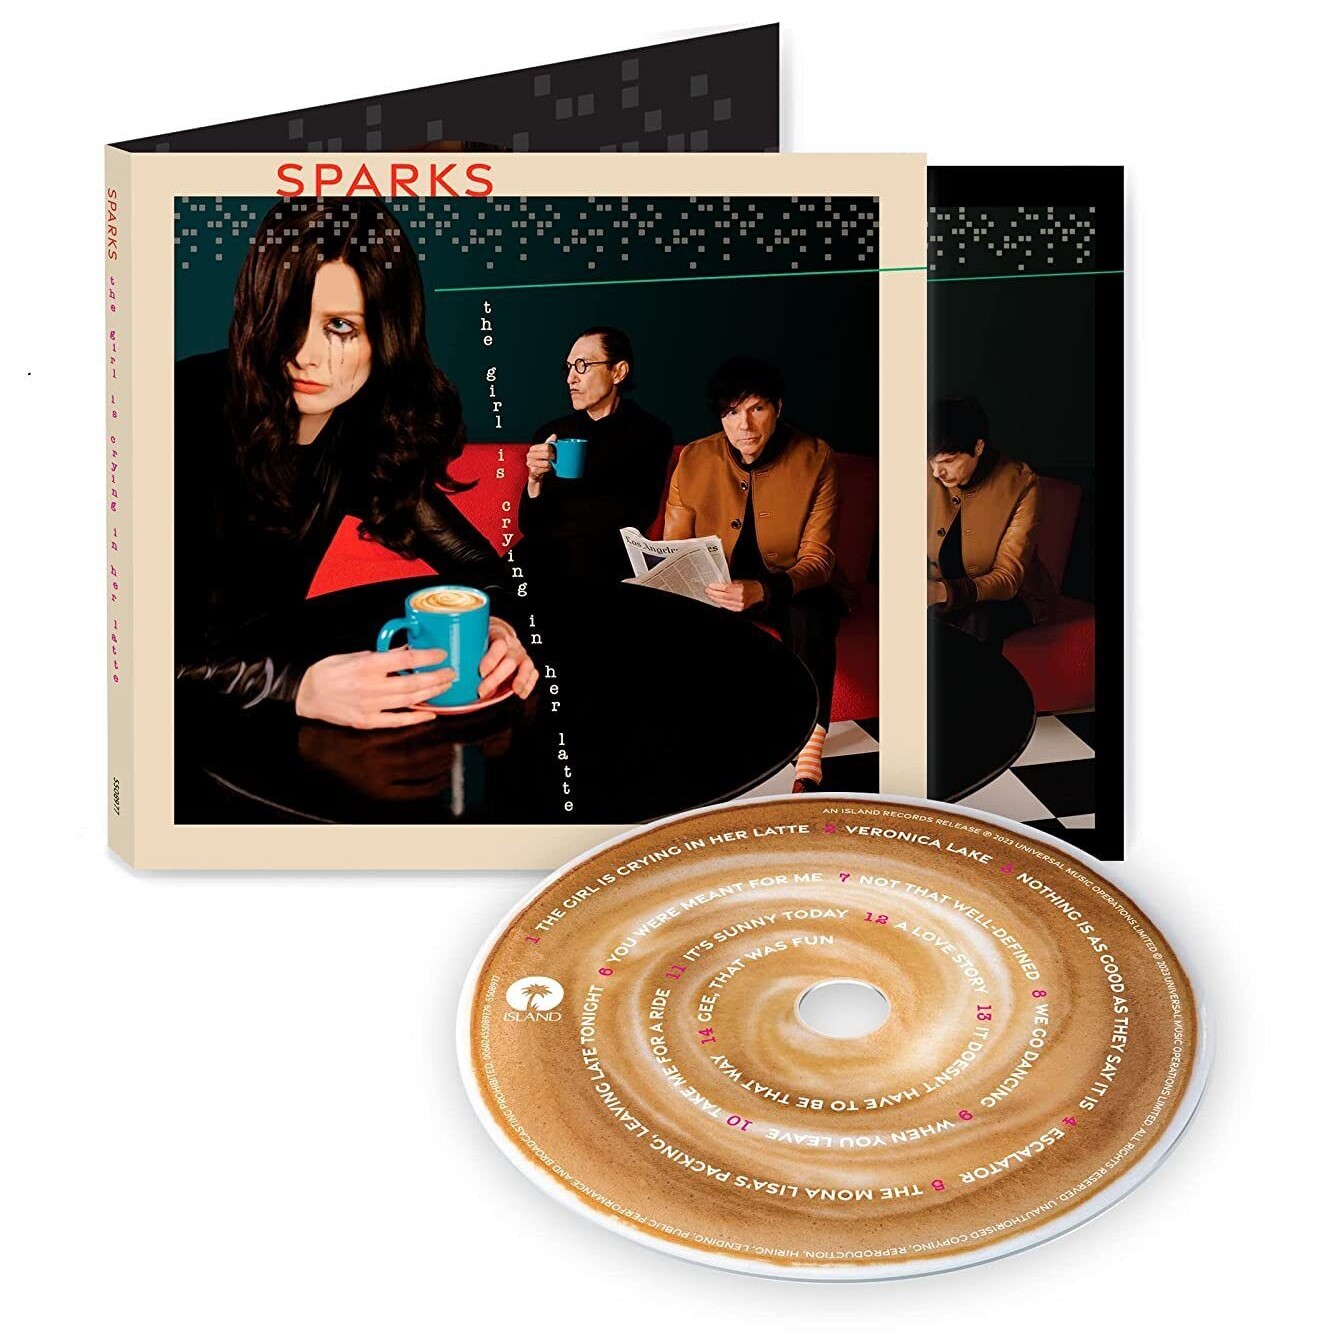 Sparks - The Girl Is Crying In Her Latte by Sparks